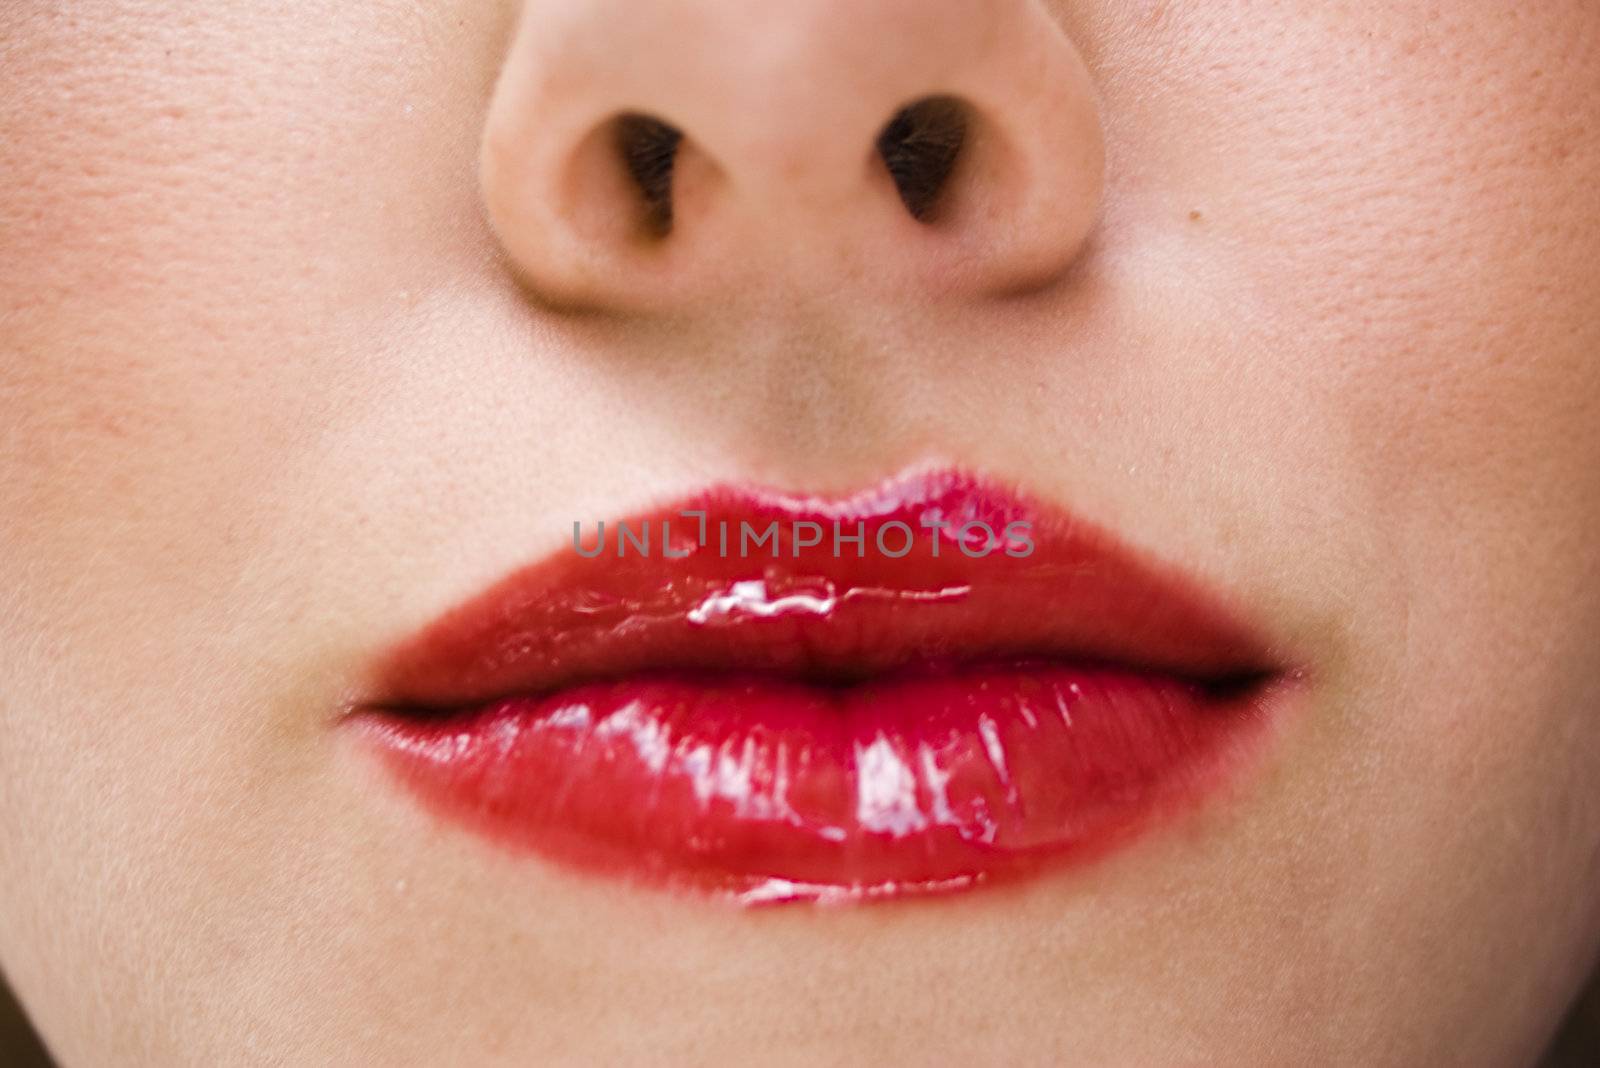 close-up of a womans red lips